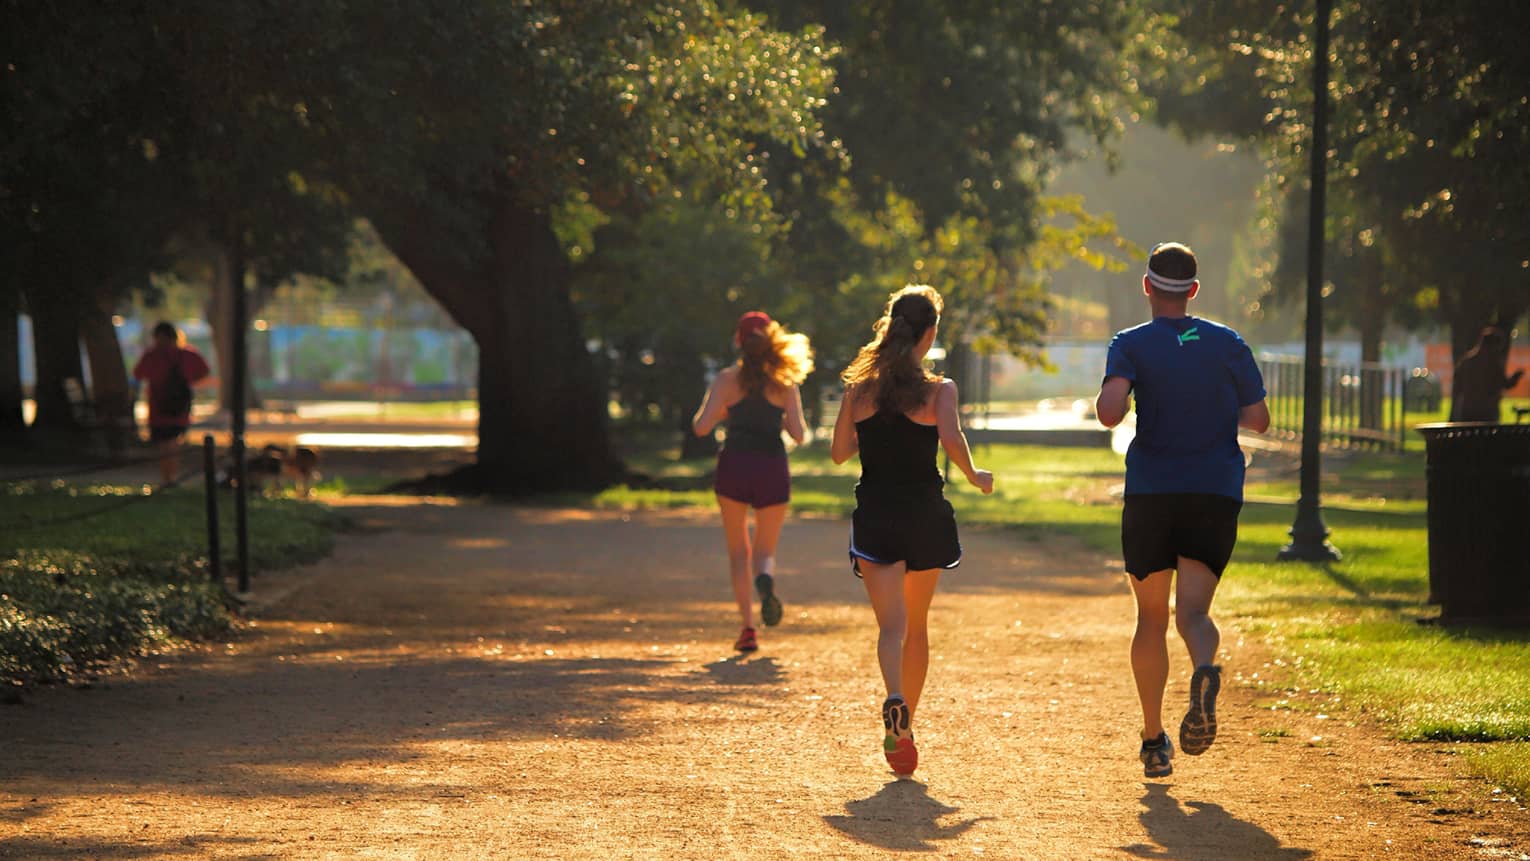 Back view of two women and a man in shorts and T-shirts, jogging down a park path